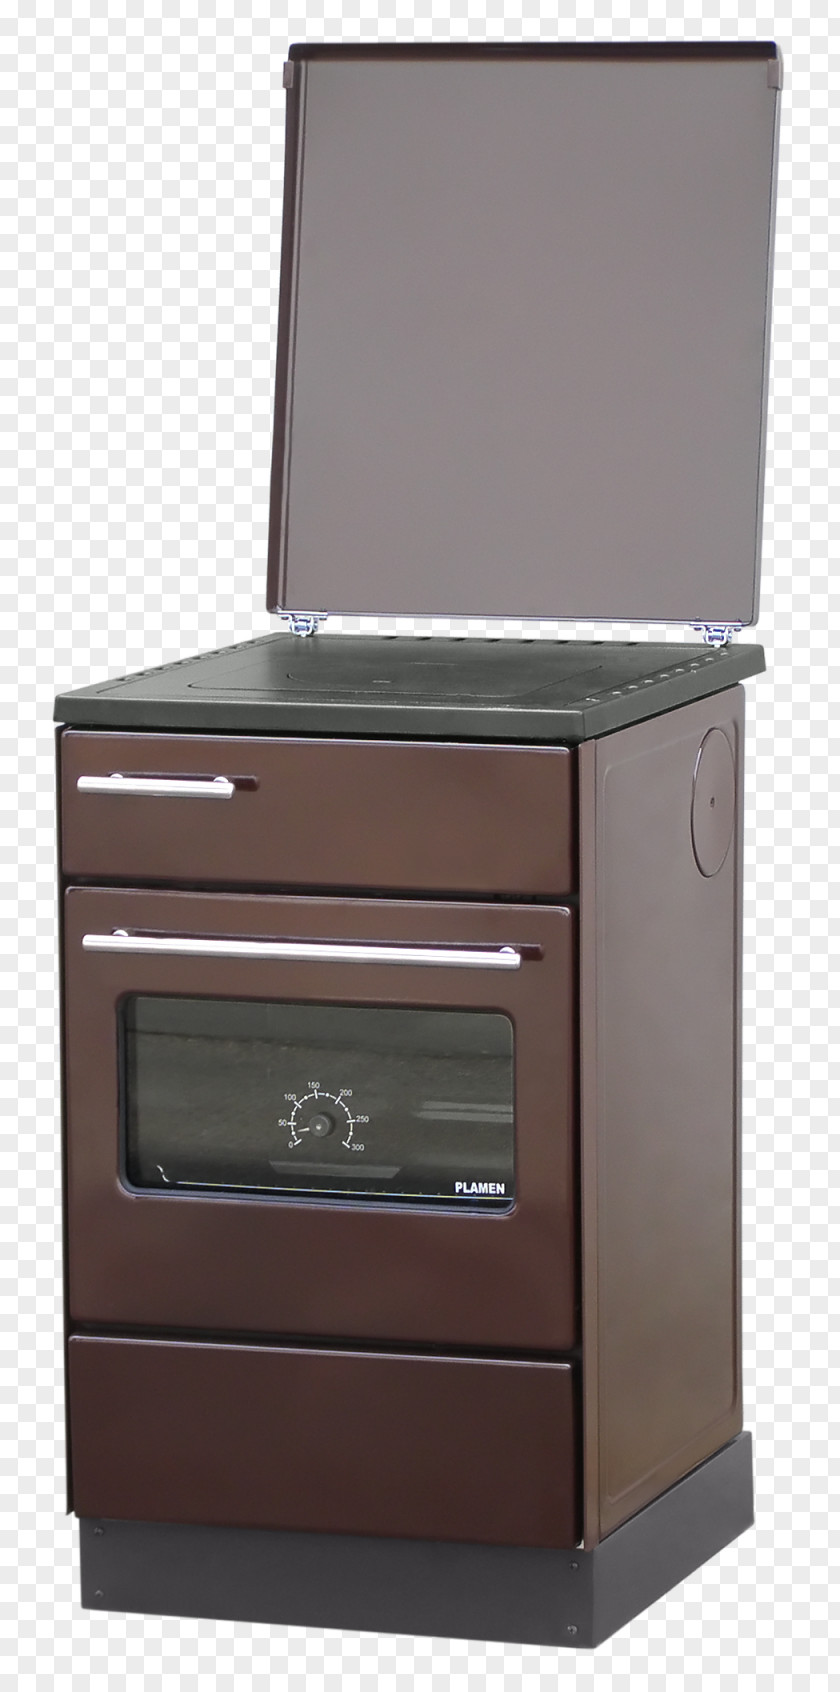 Flame Gas Stove Cooking Ranges Drawer Oven PNG